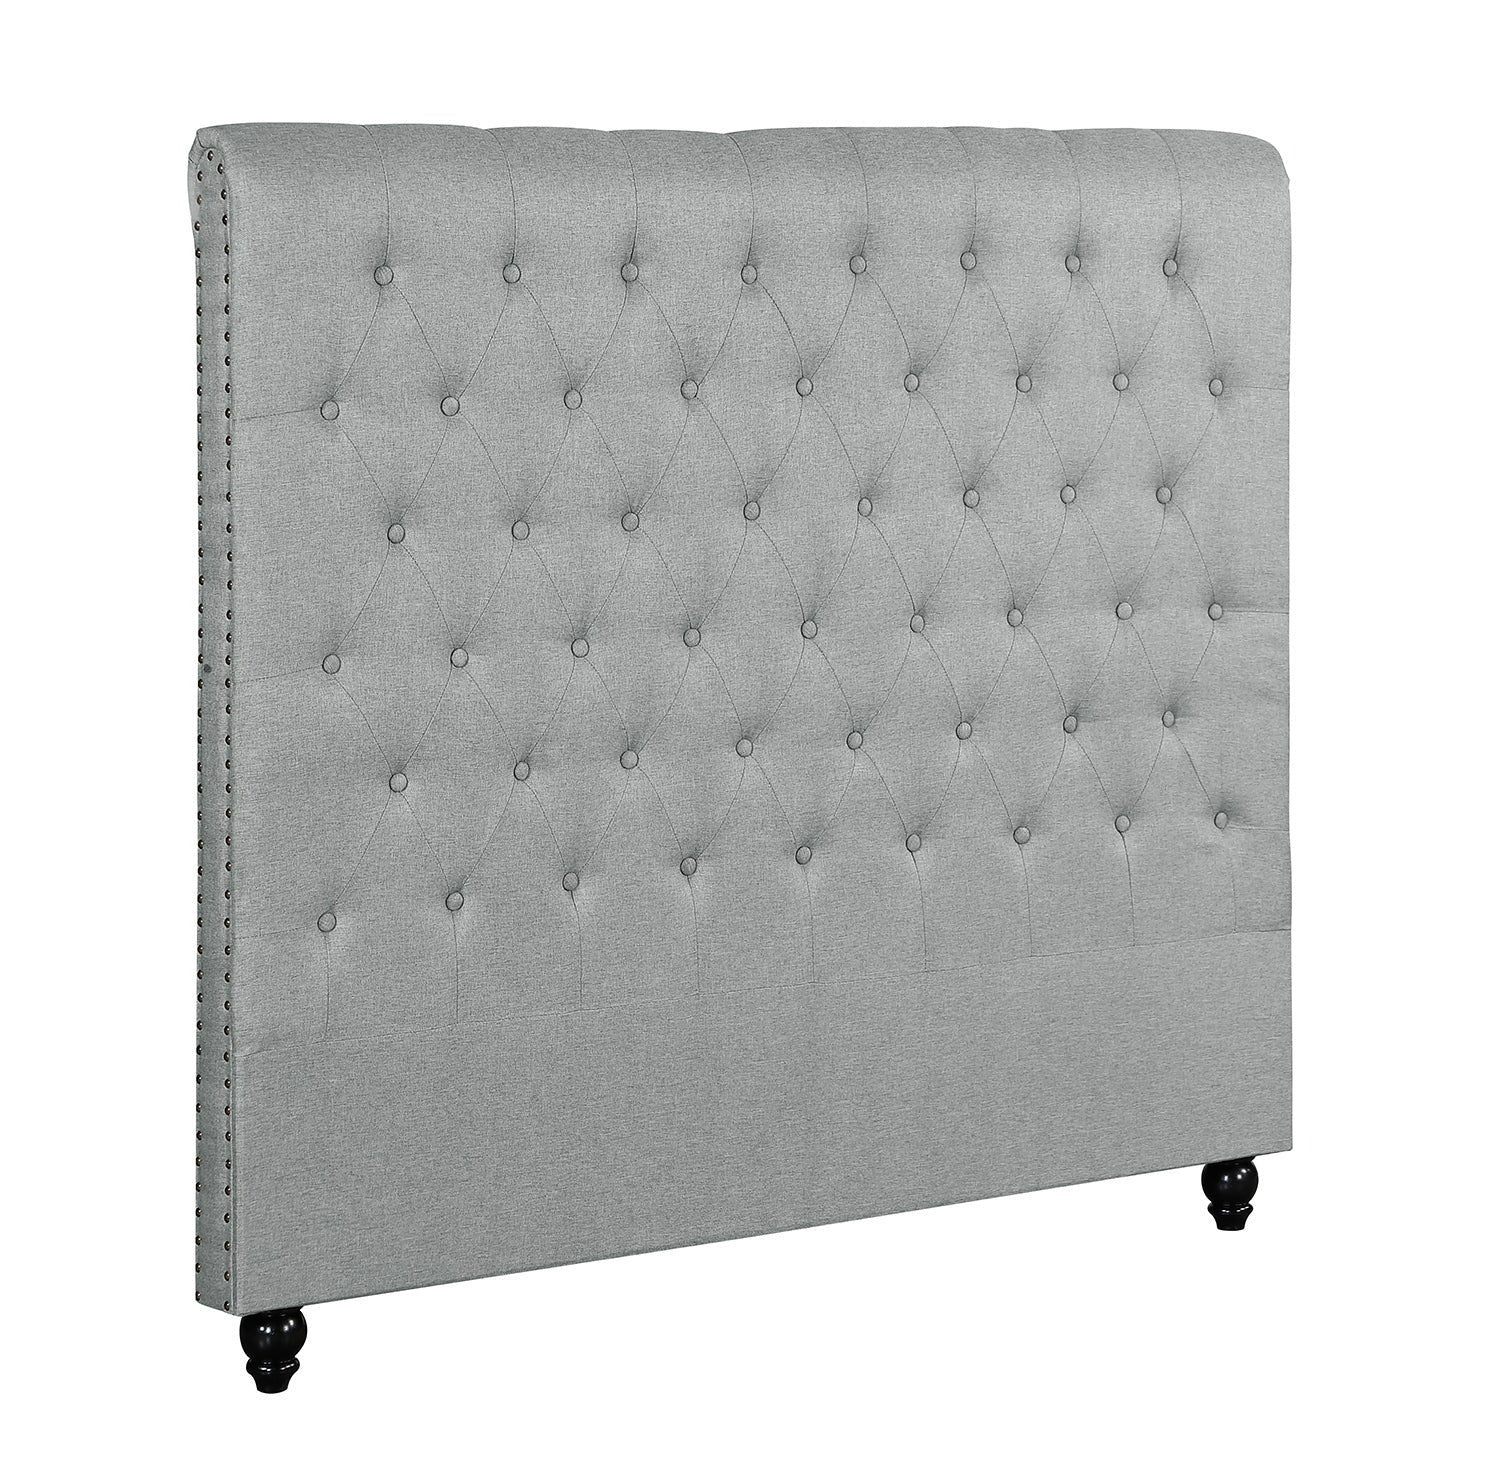 Foret Bed Head Queen Size Upholstered Headboard Bedhead Frame Fabric Grey